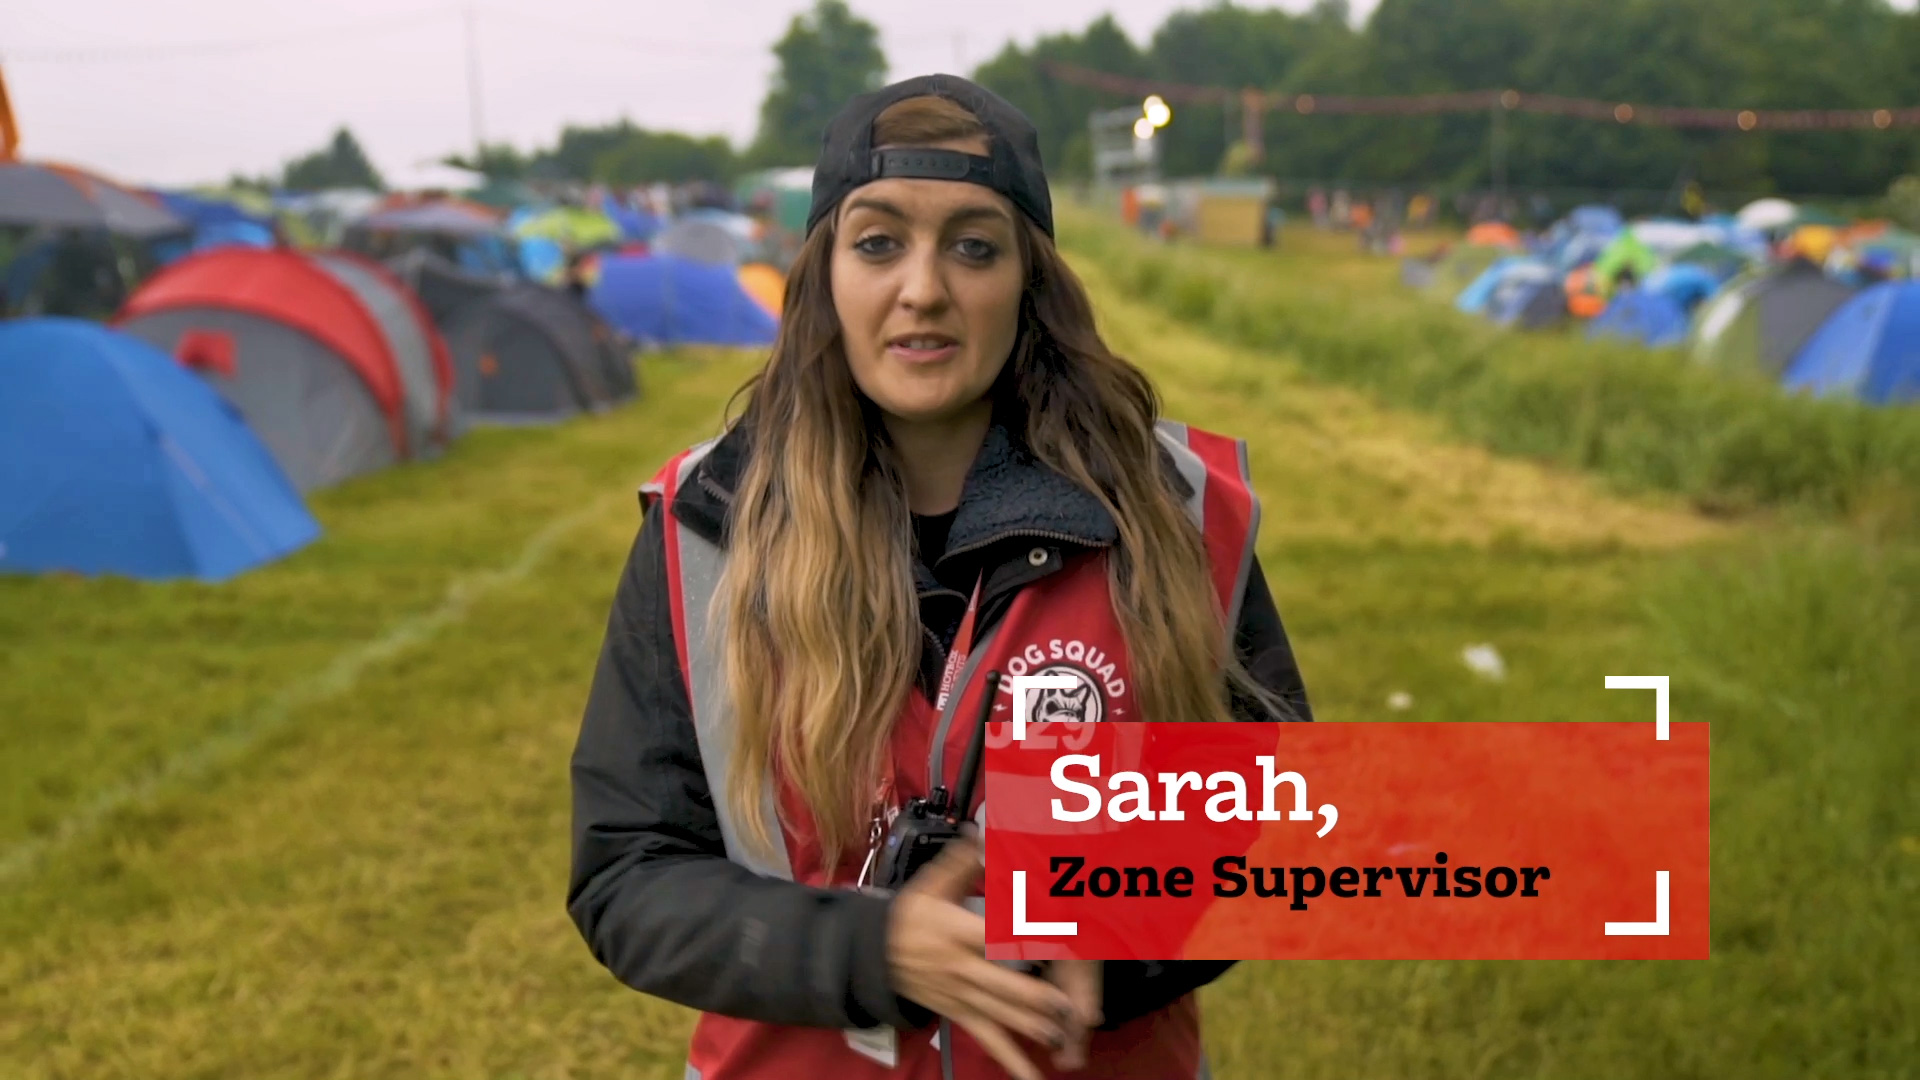 Sarah a Campsite Supervisor working with Hotbox Events at Download Festival!